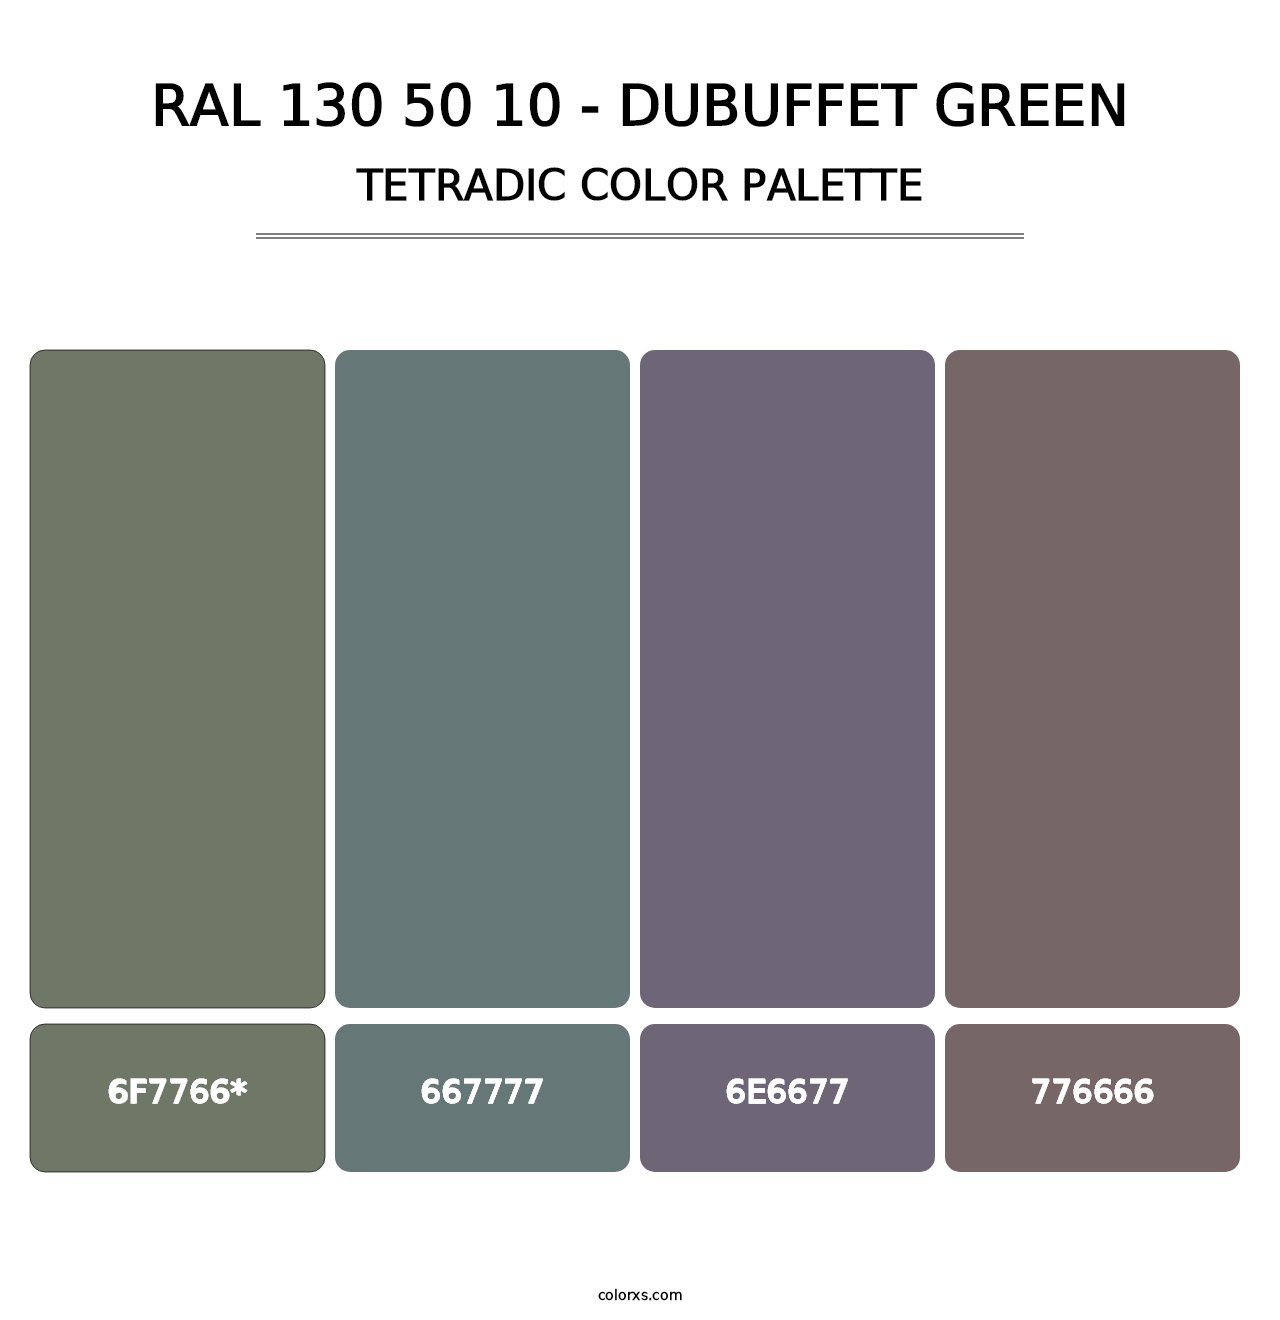 RAL 130 50 10 - Dubuffet Green - Tetradic Color Palette